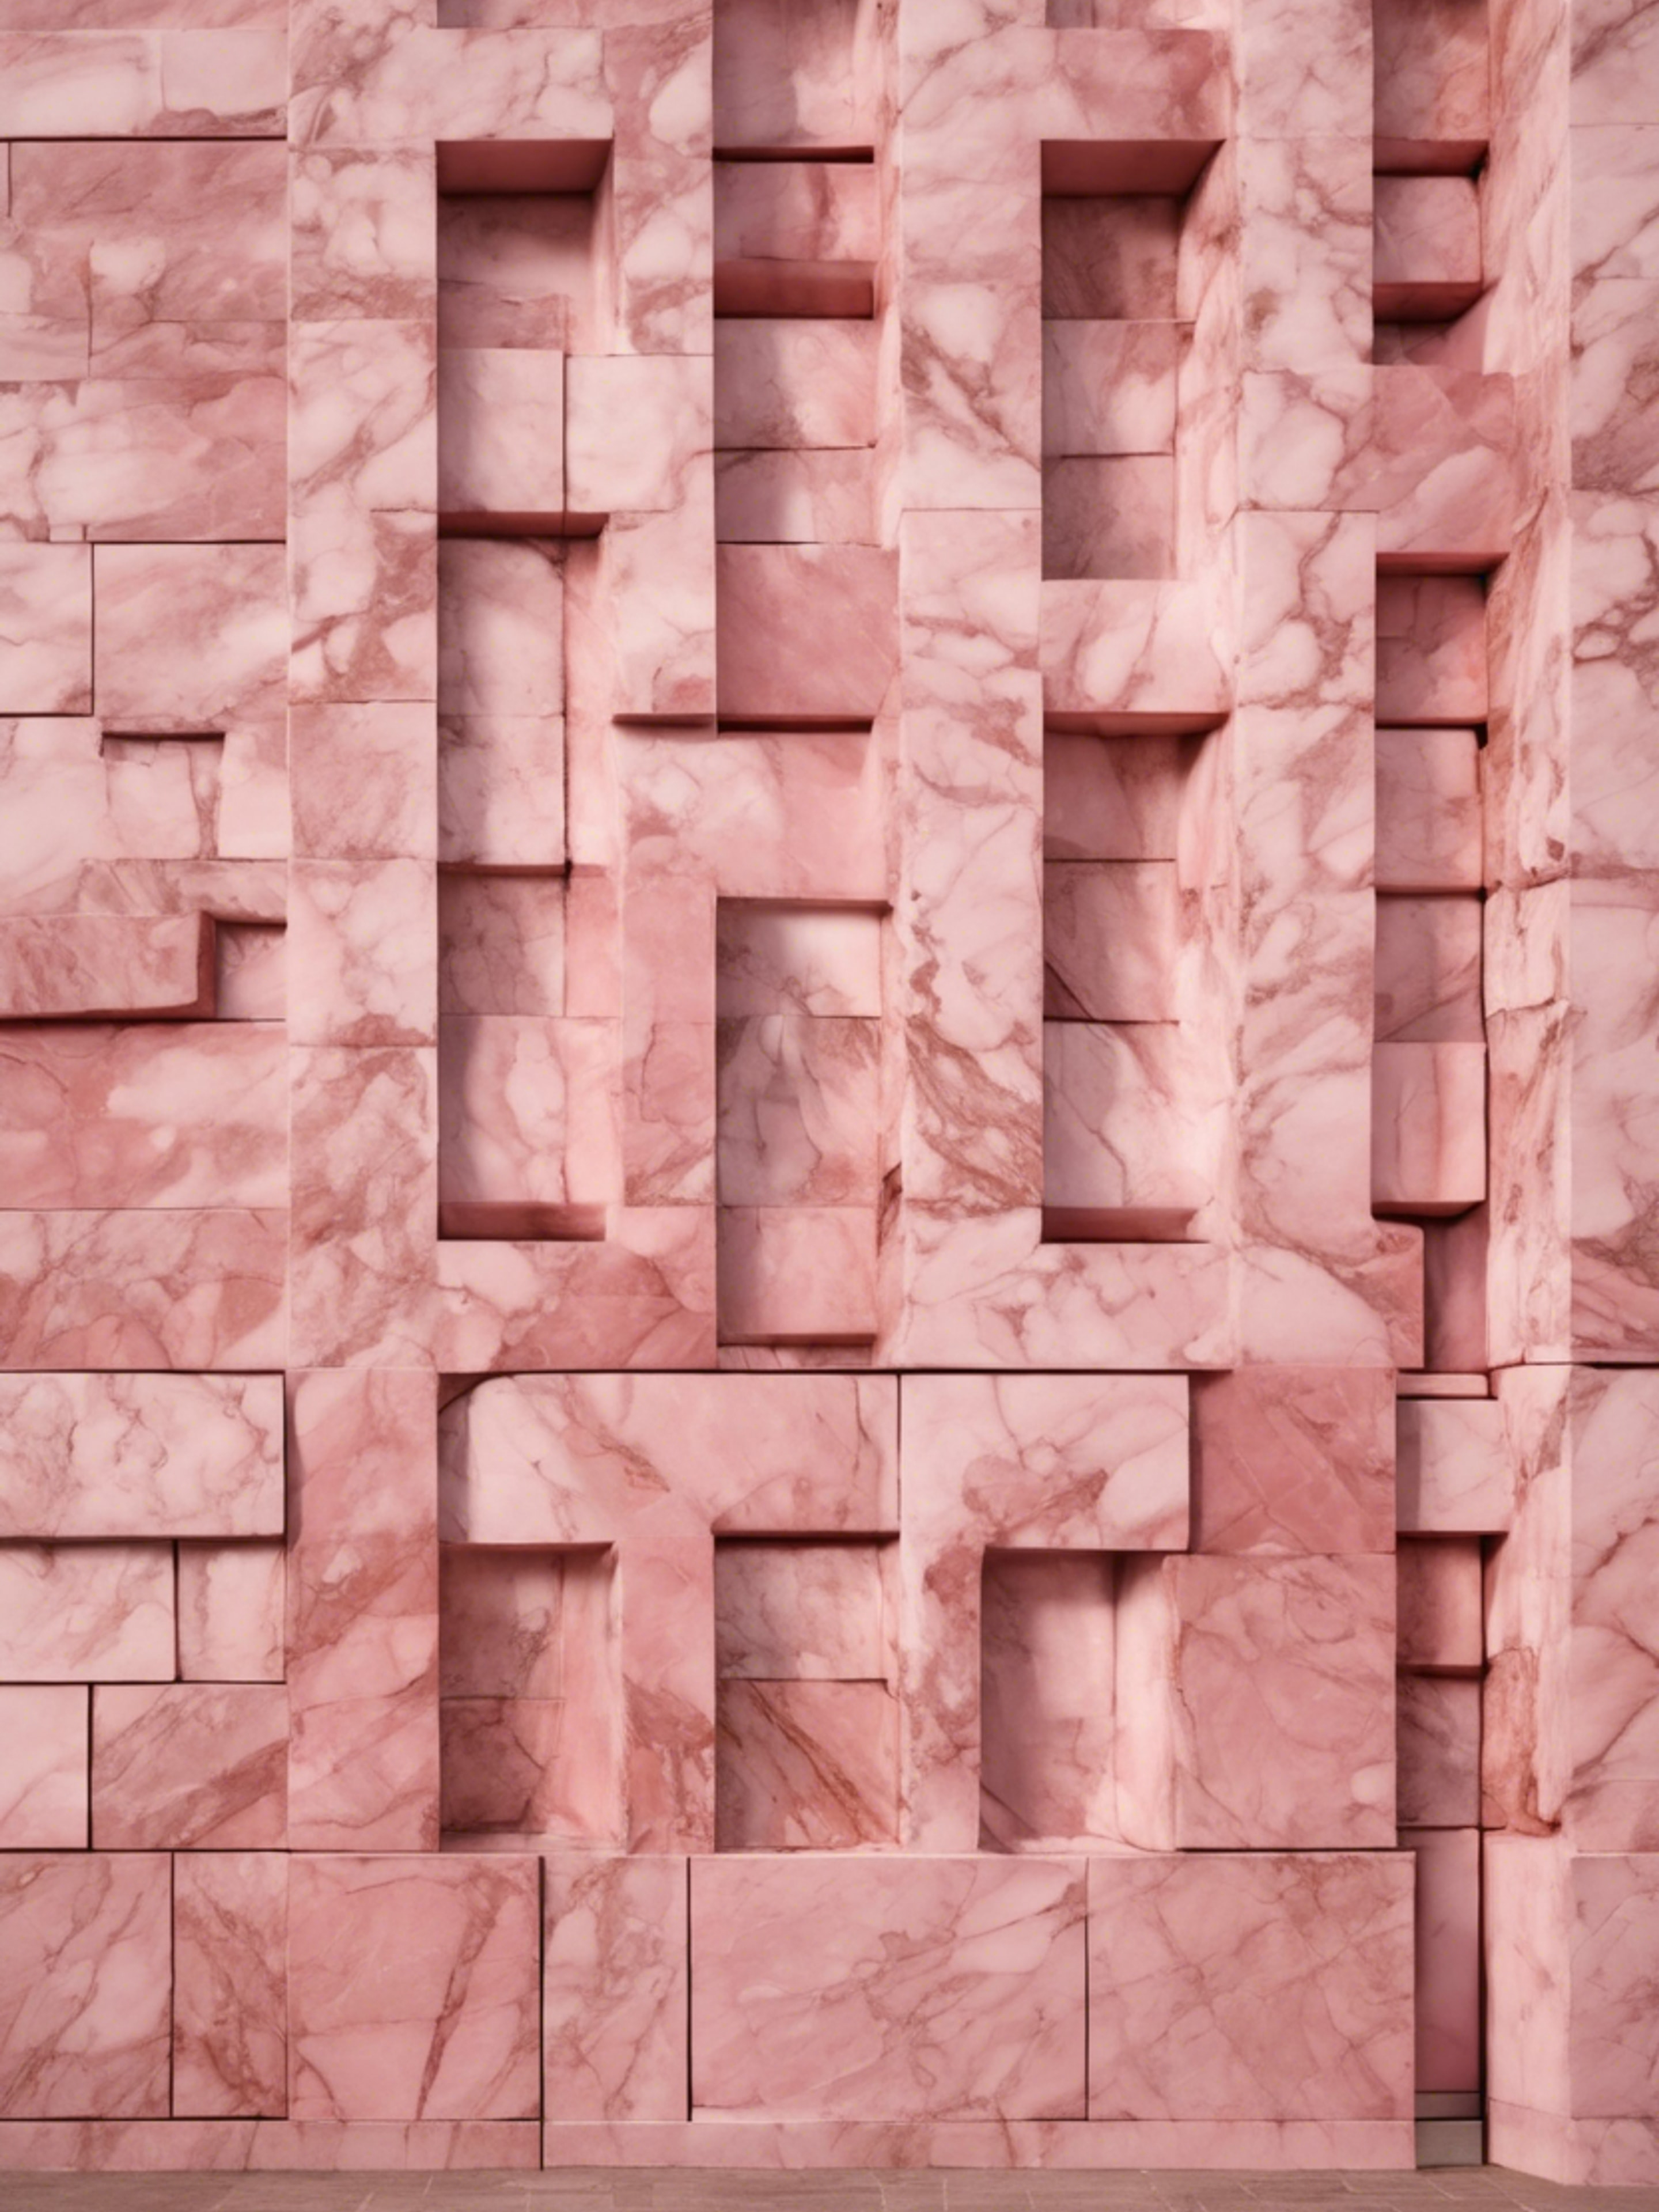 An outdoor wall of a building, made of polished pink marble. Hình nền[24255f95efd34f59a019]